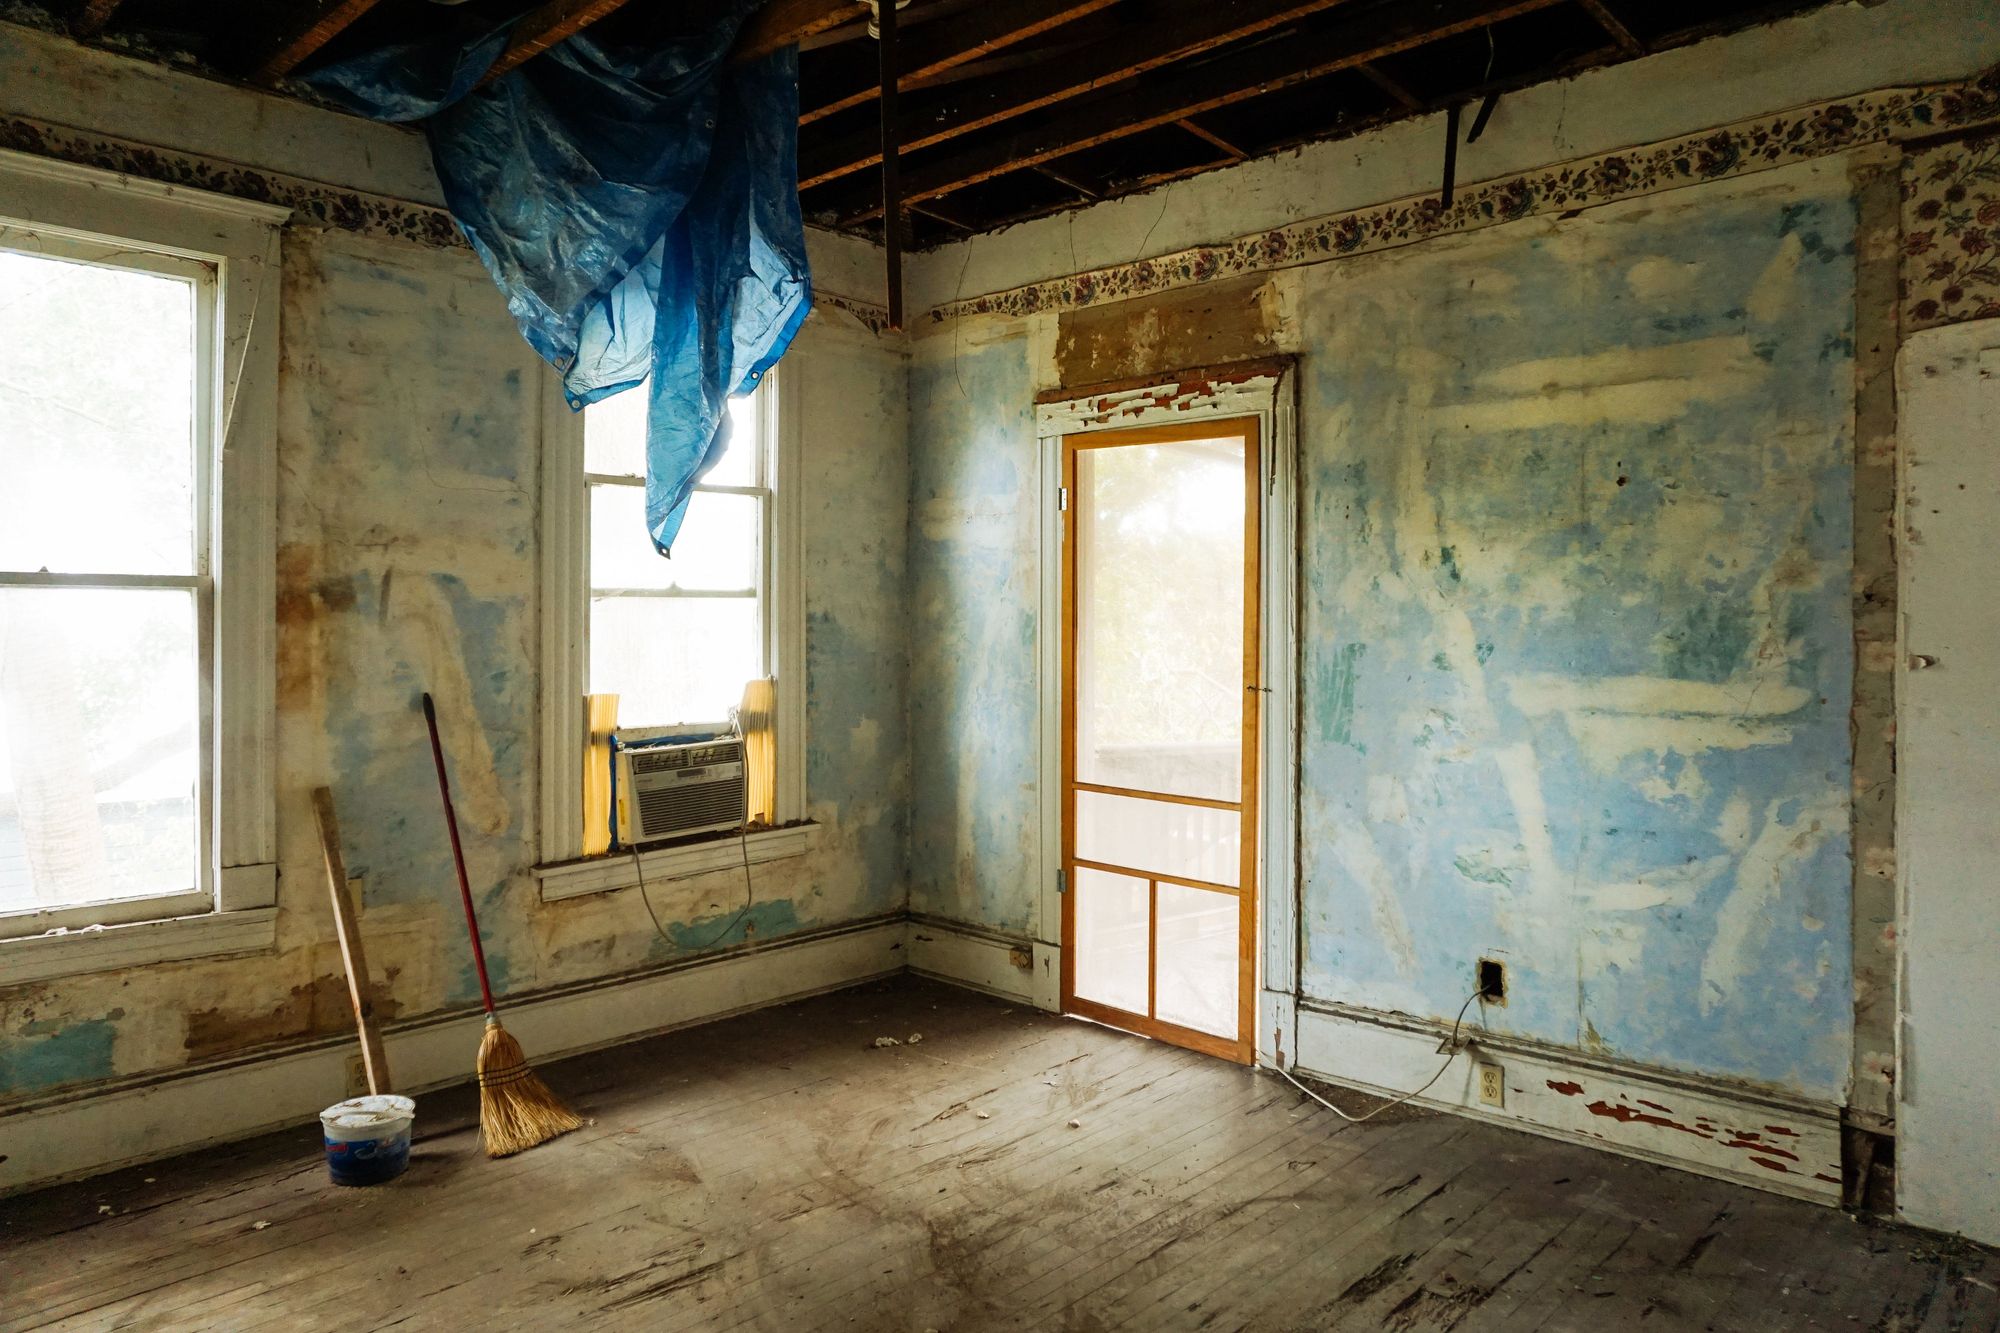 Financing Options to Consider for Your Home Renovations